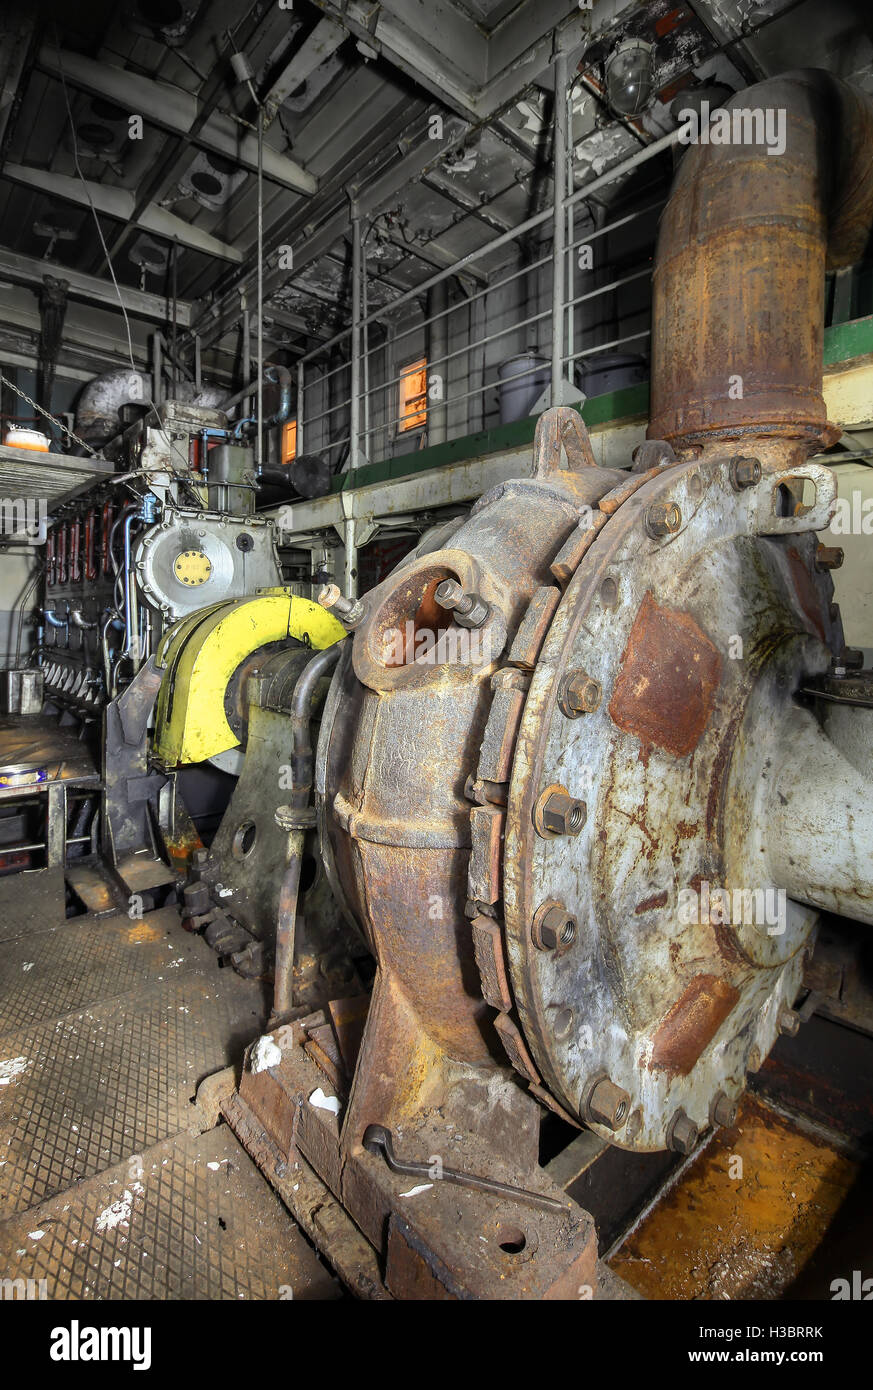 The ship's hold with diesel engine mounted on ship. Engine room on a old cargo boat ship. Stock Photo